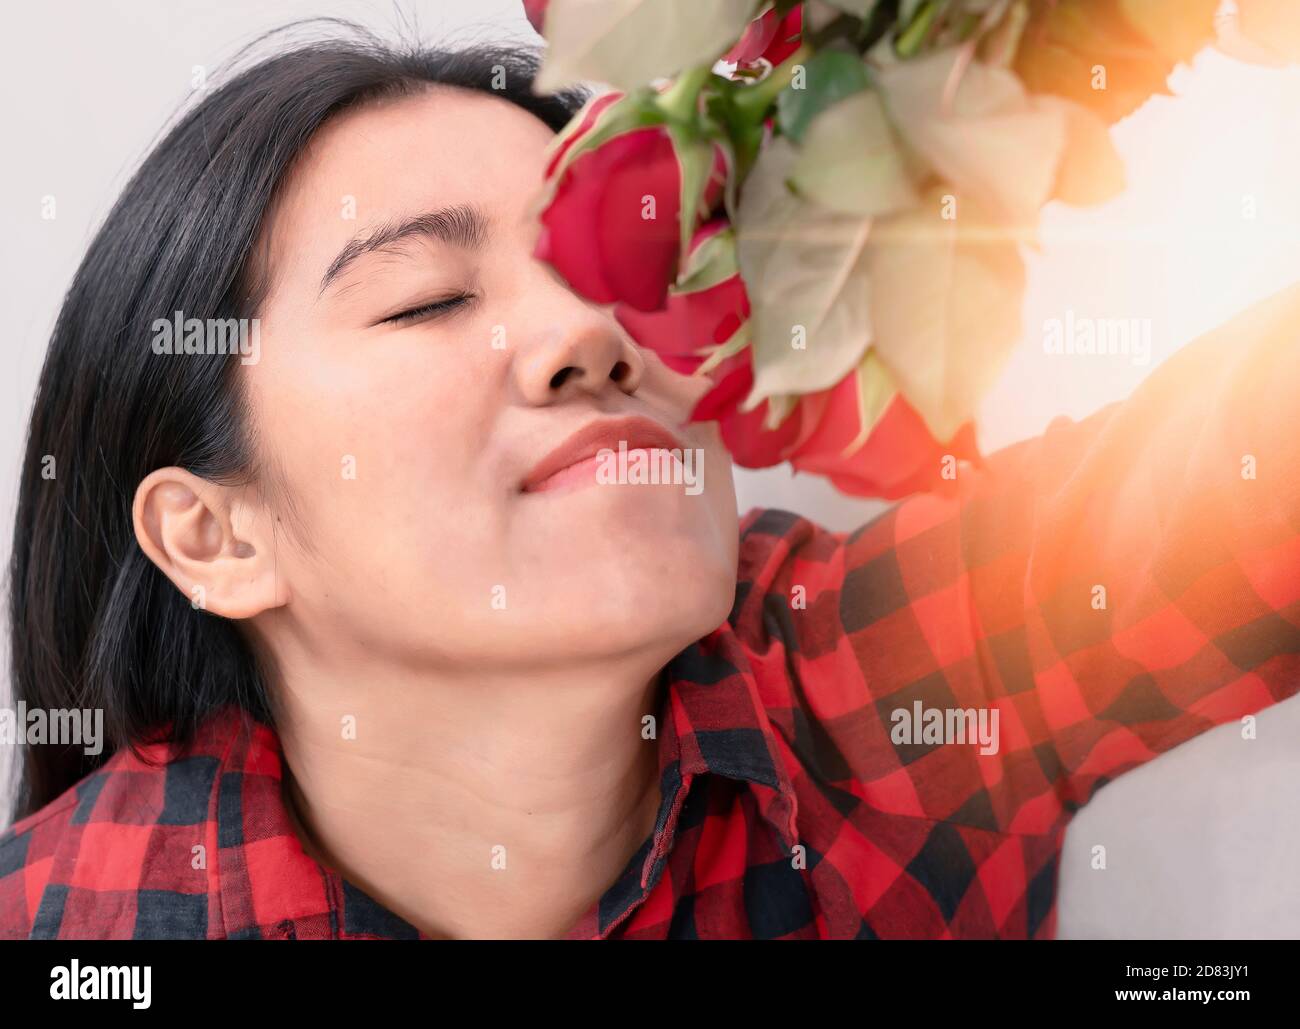 The girl wearing a black-red striped dress sniffing red roses, red roses represent love on Valentine's Day, the idea of giving love to each other. Stock Photo